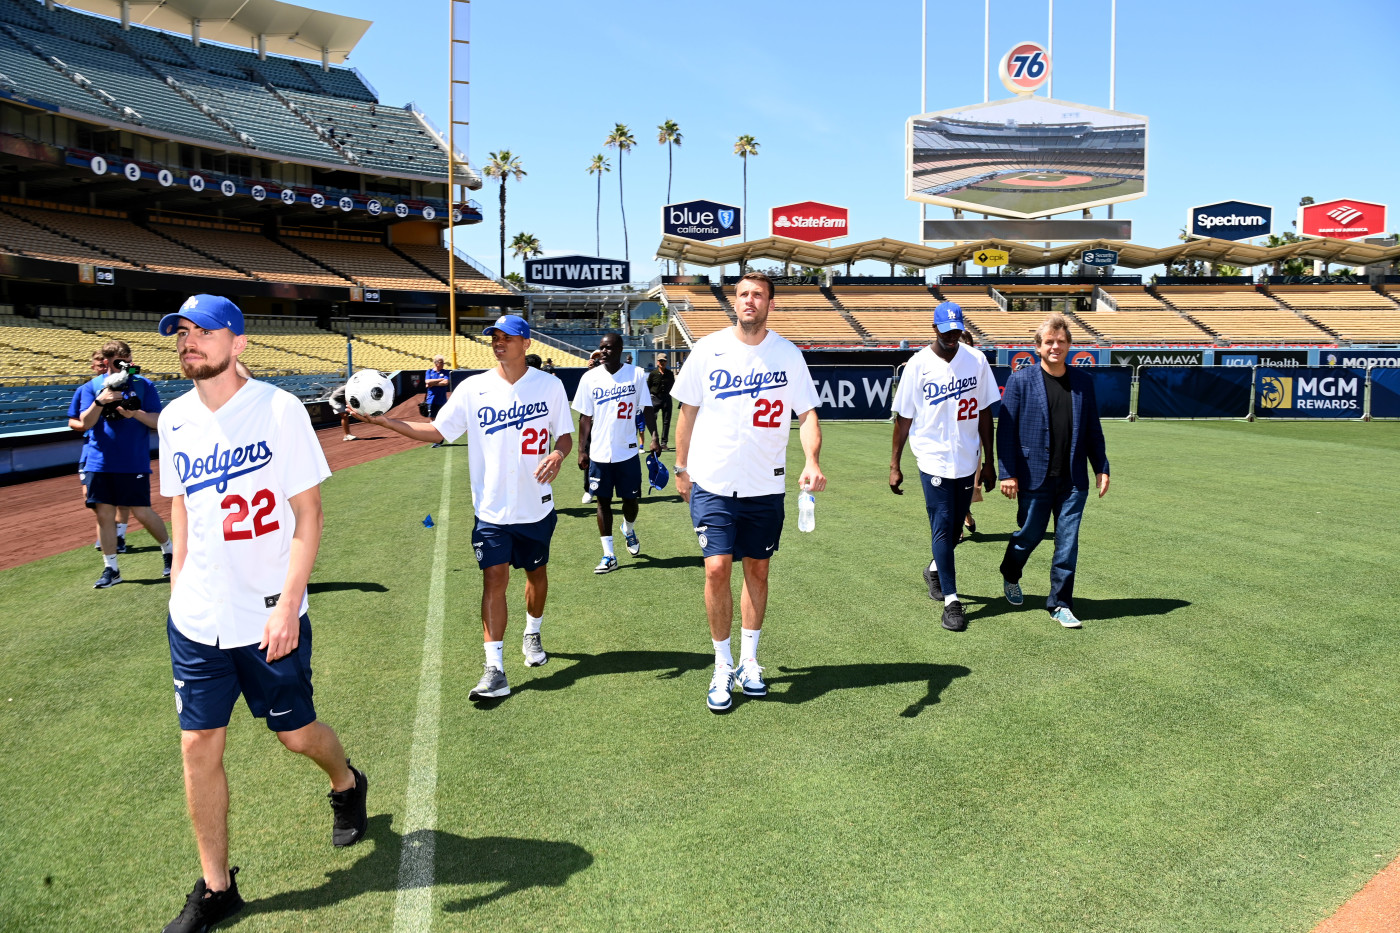 Chelsea stars including Raheem Sterling join Todd Boehly at LA Dodgers'  stadium during pre-season tour of US